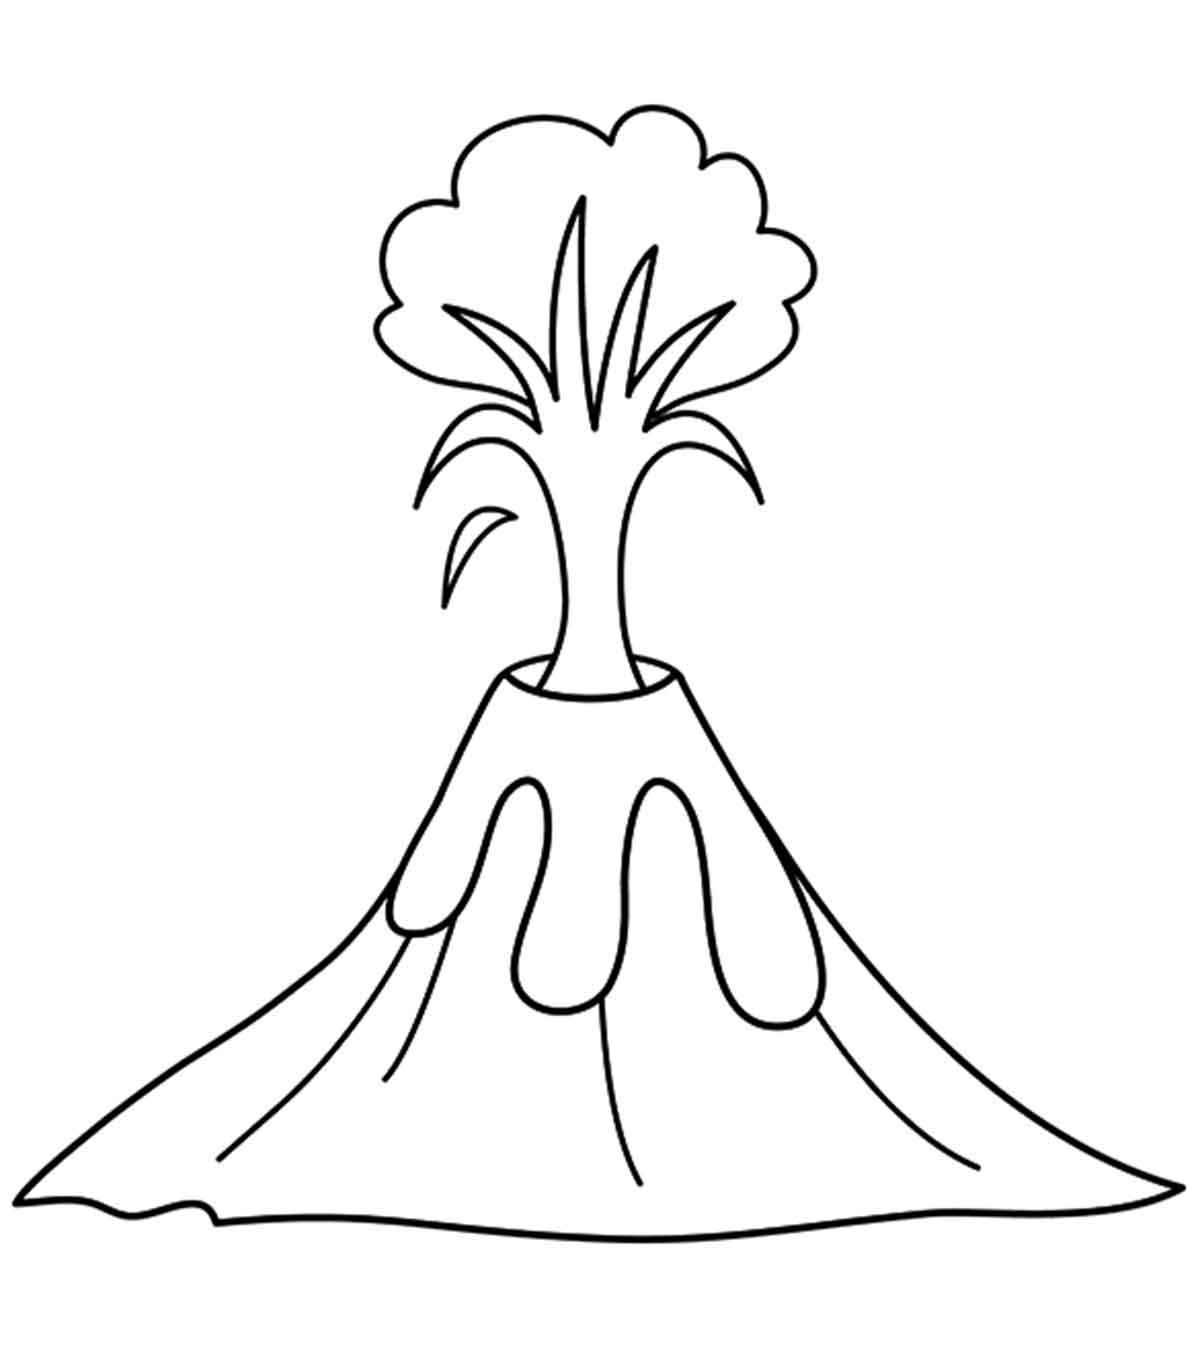 Lava Coloring Pages - Coloring Home